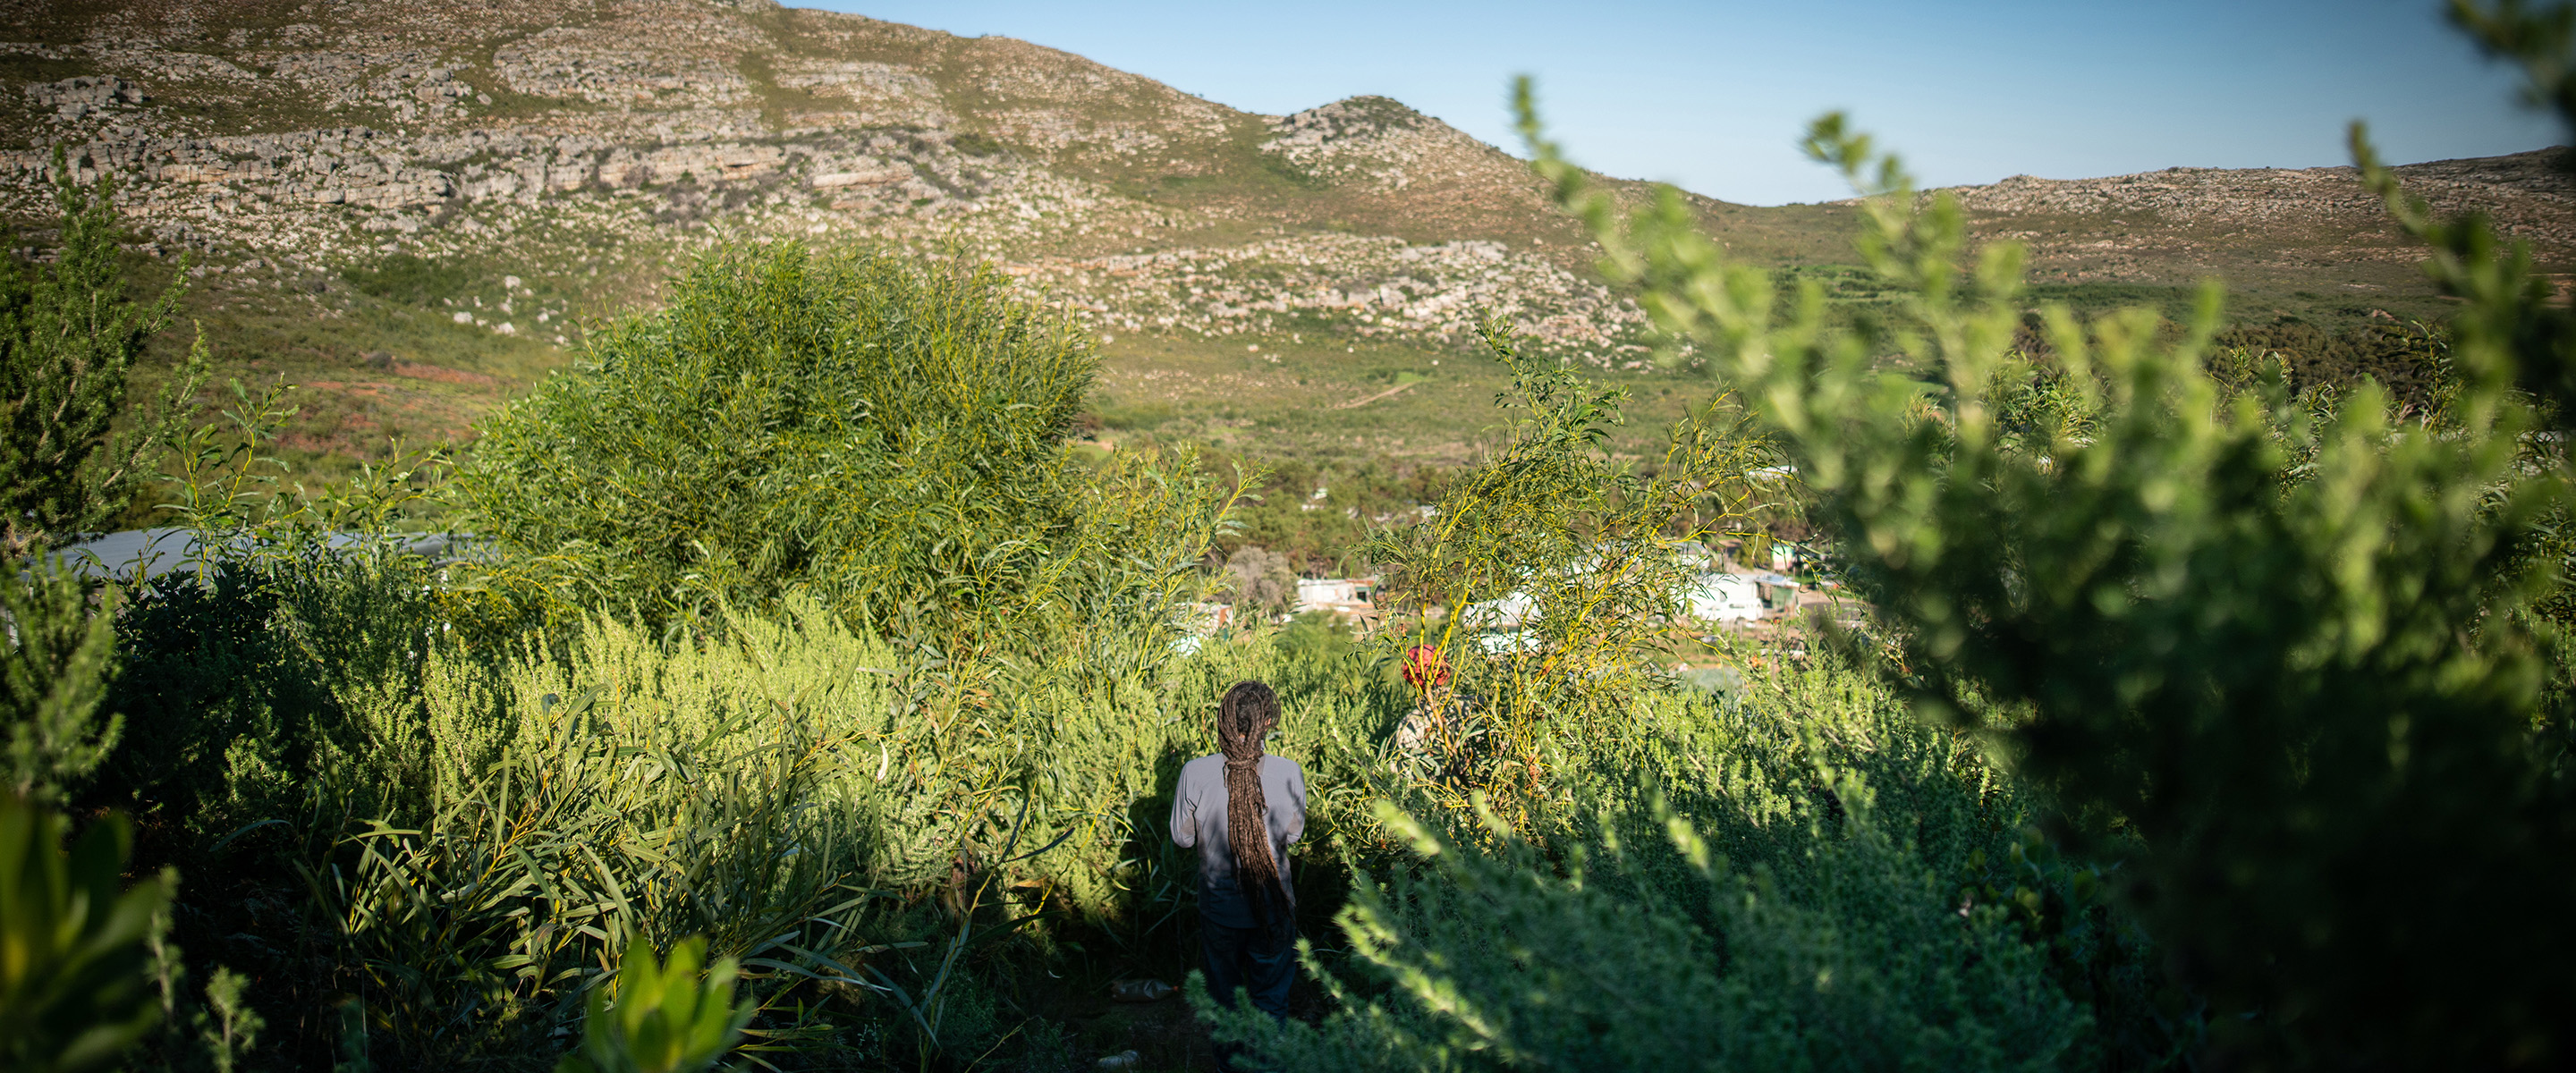 Carlo Randall: Planting Seeds Against Biopiracy in South Africa’s Western Cape